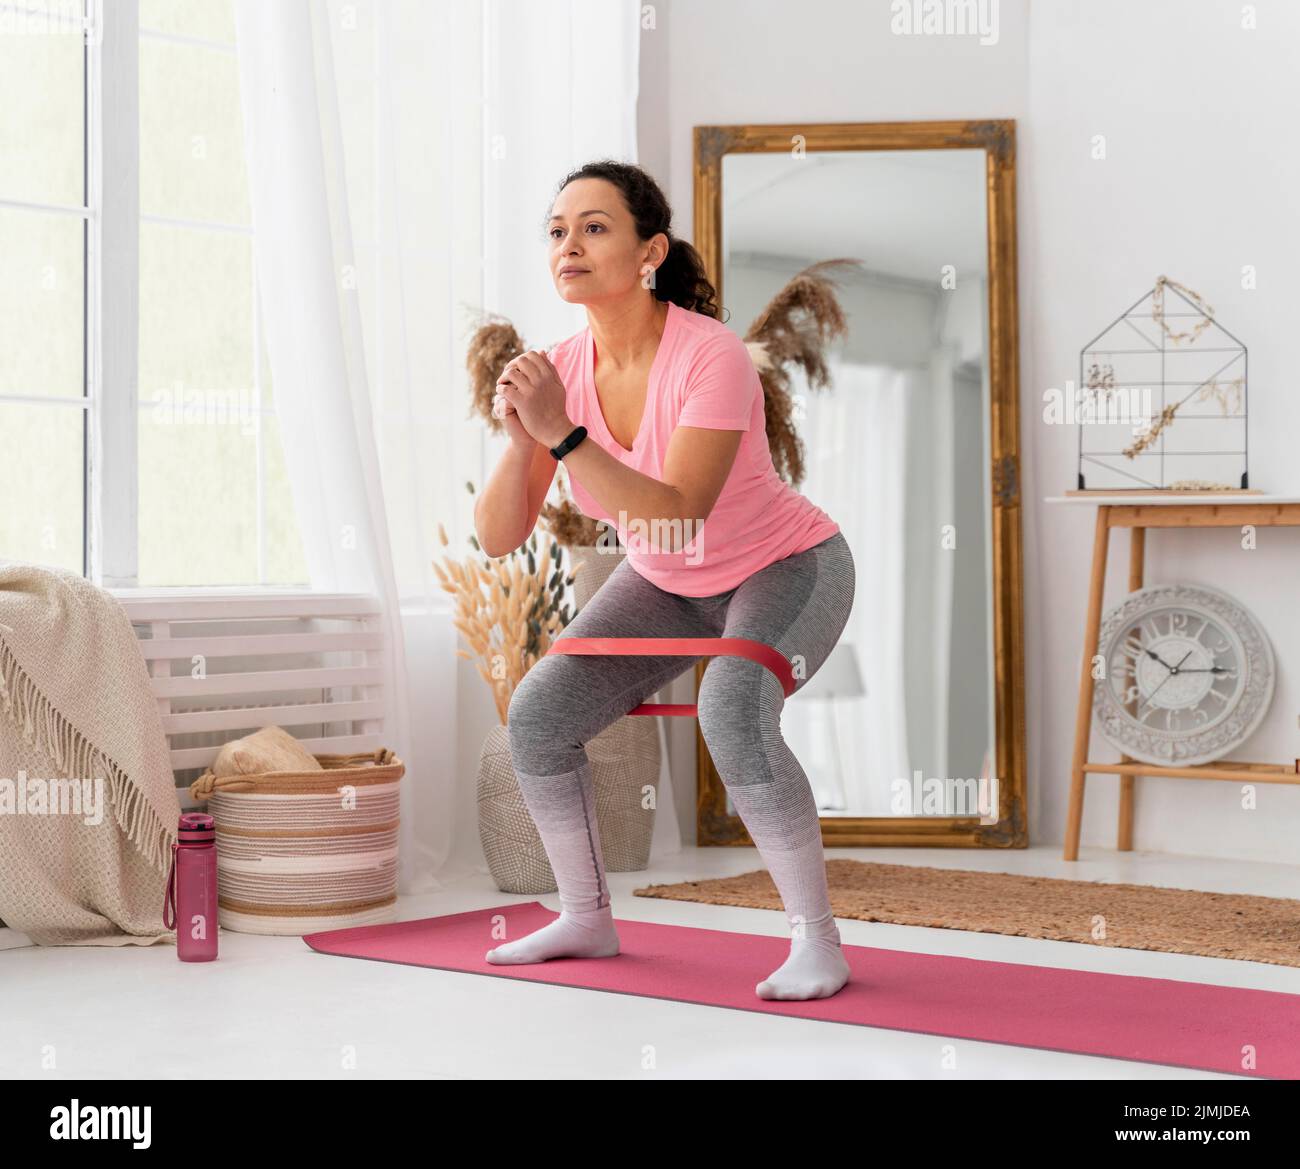 Full shot woman training with resistance band Stock Photo